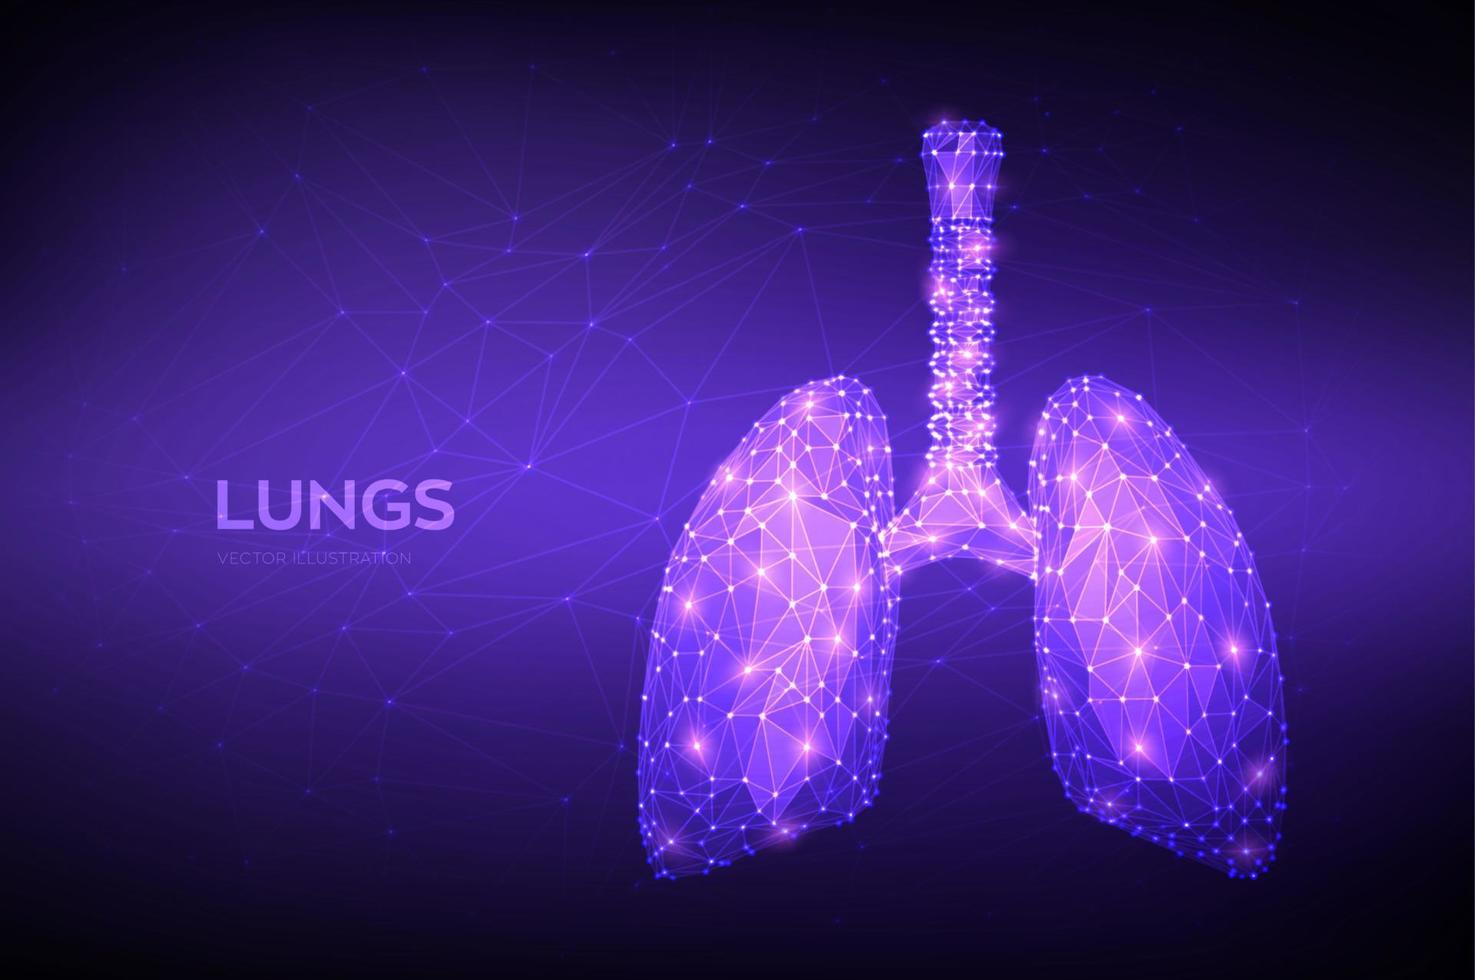 Lungs. Low polygonal human respiratory system lungs anatomy. Treatment of lung diseases. Medicine cure tuberculosis, pneumonia, asthma. Abstract health care medical concept. Vector illustration.